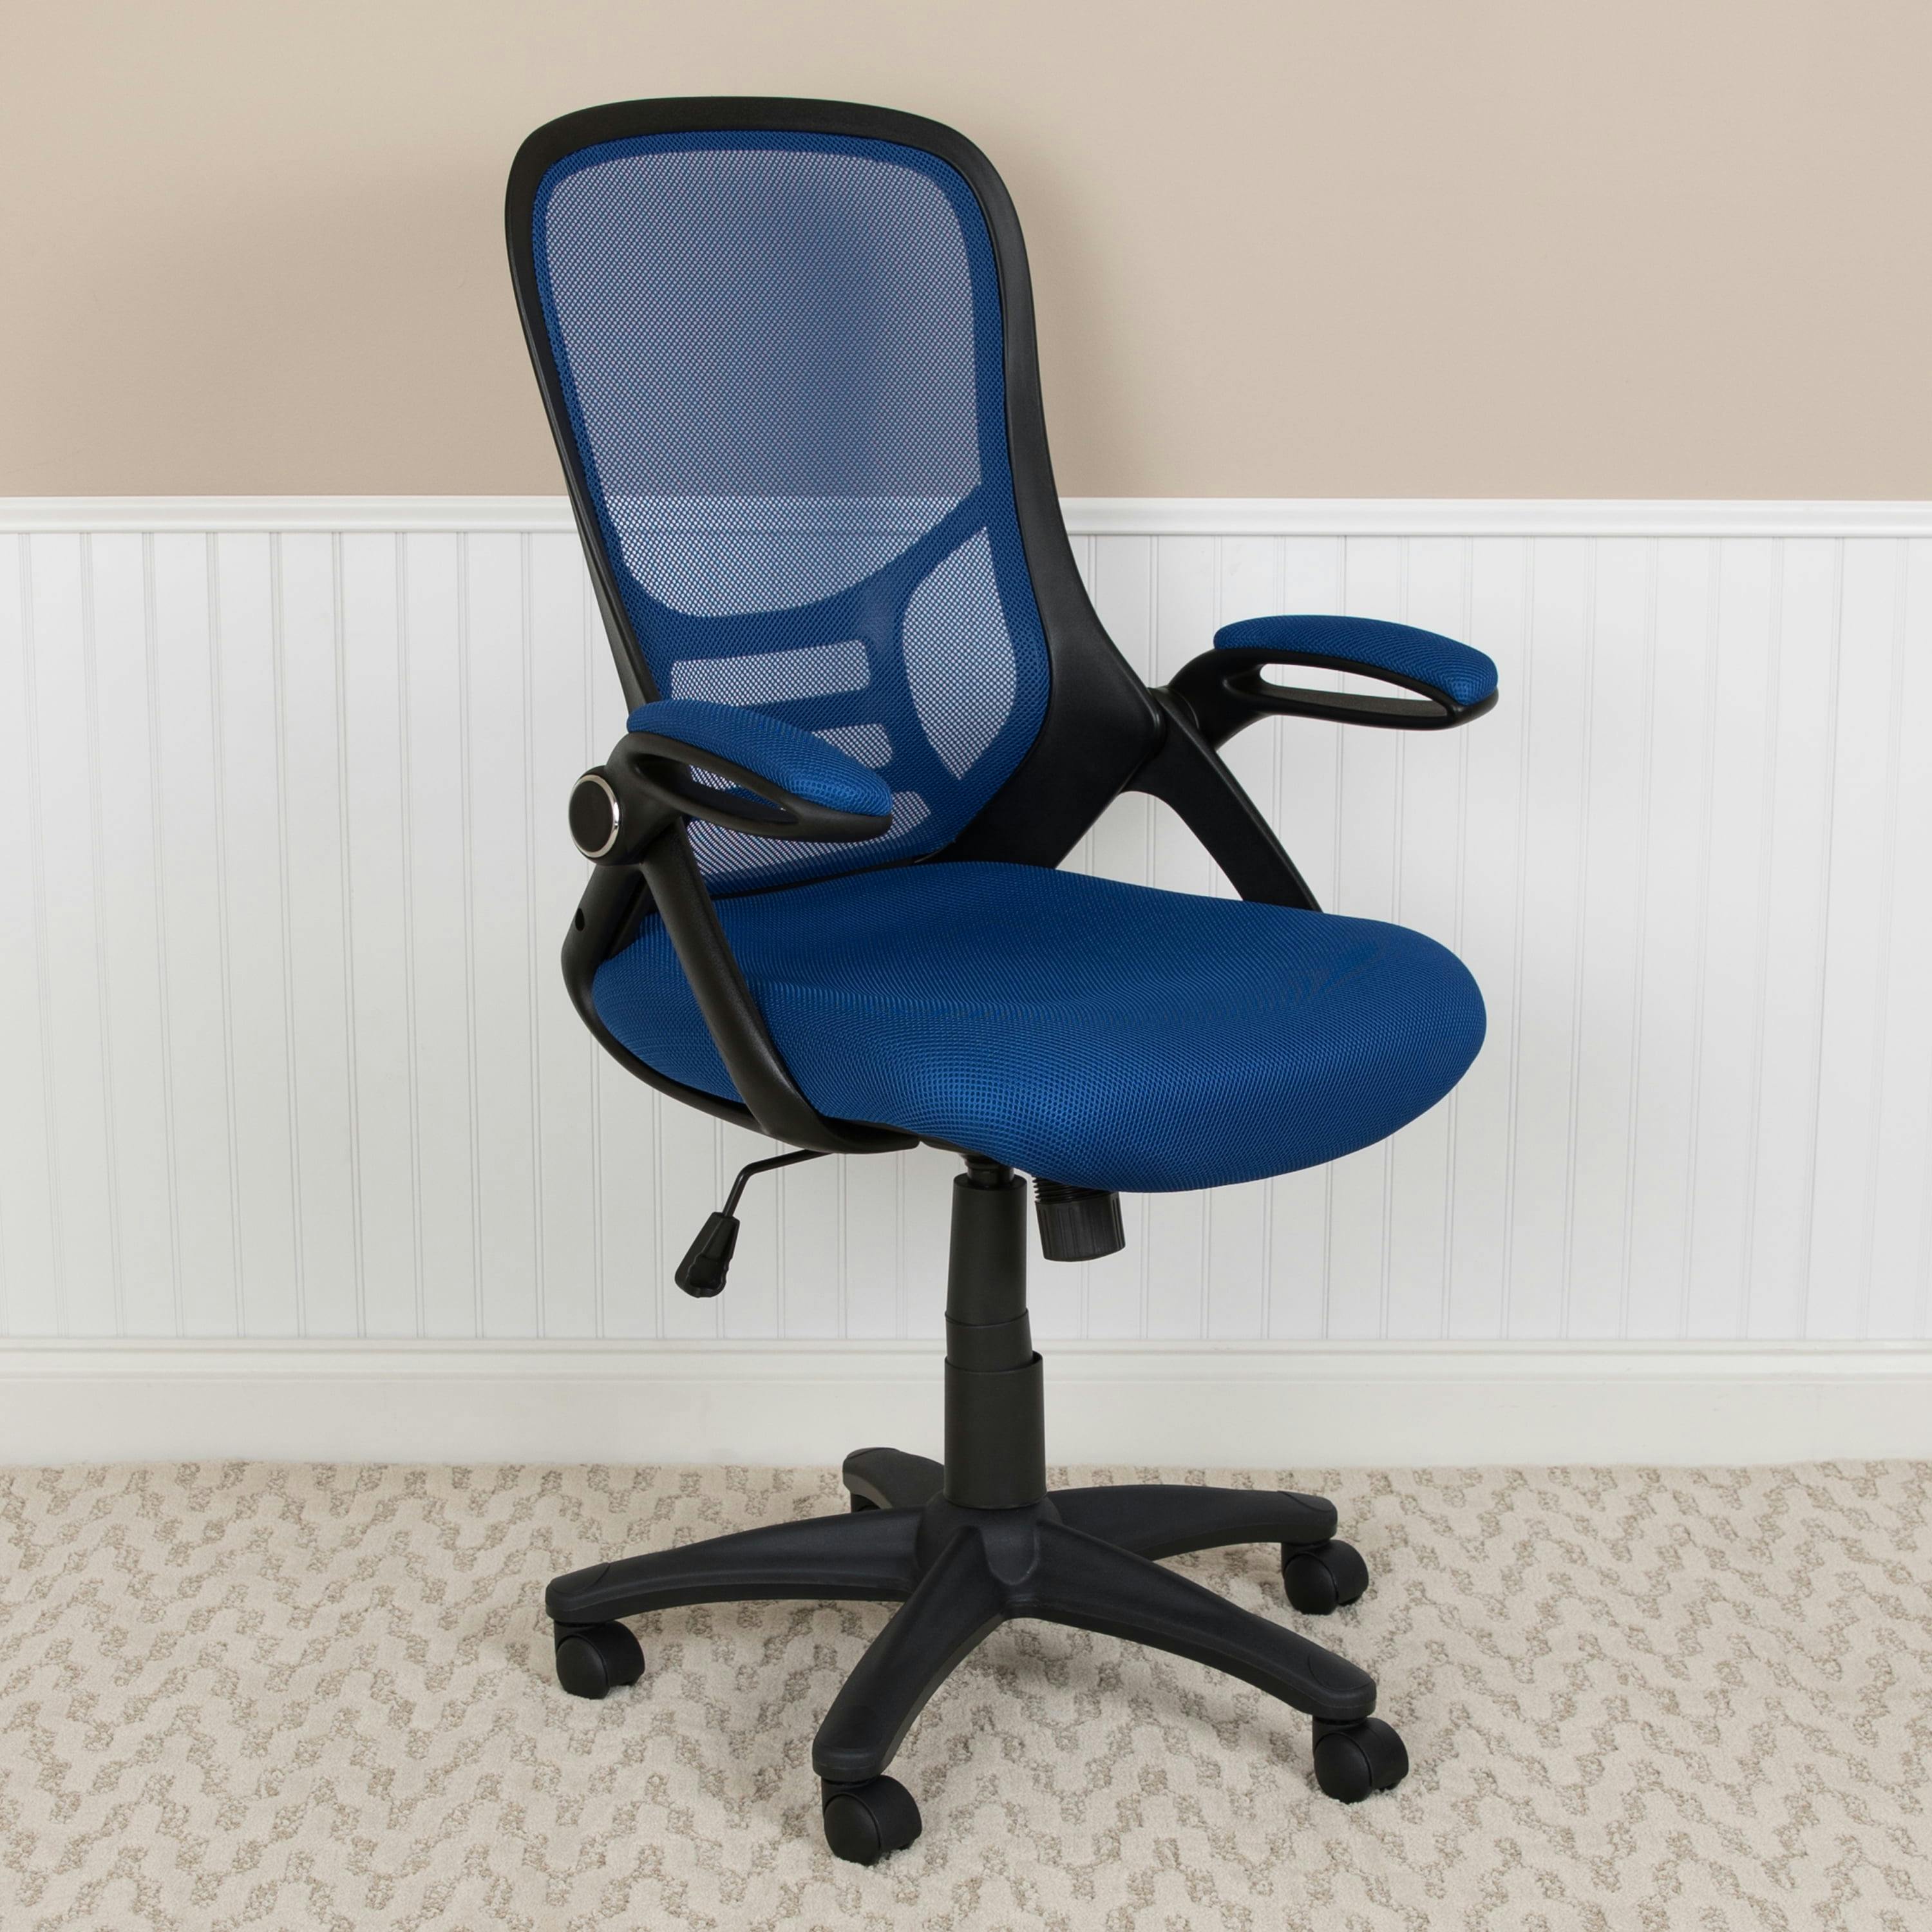 Ultra-Comfort High-Back Blue Mesh Swivel Executive Chair with Adjustable Arms